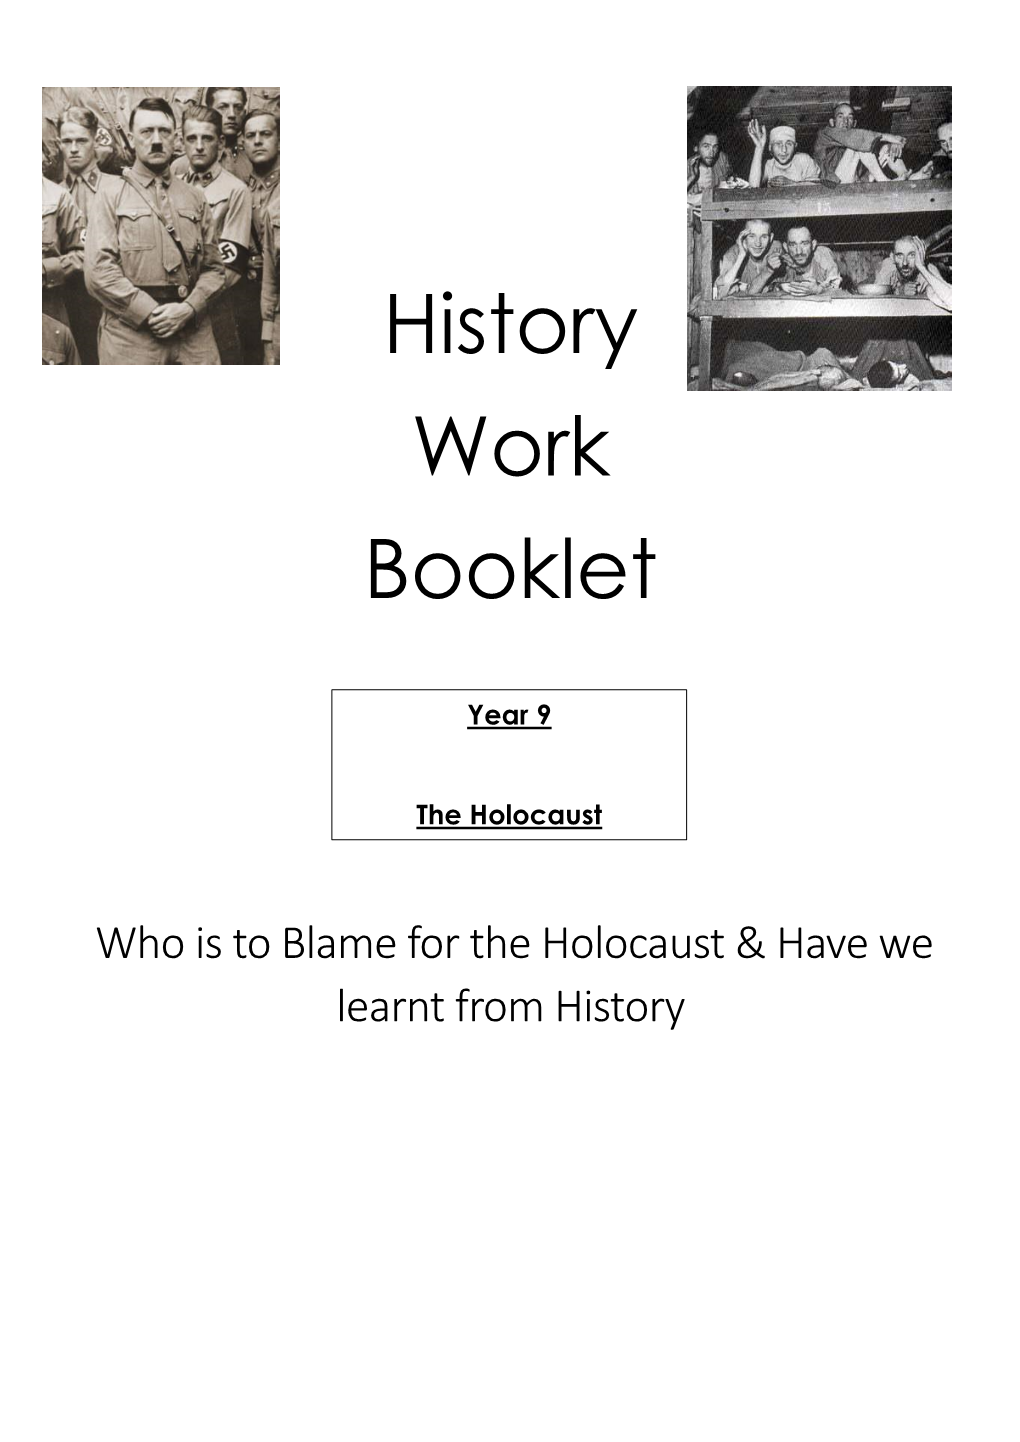 History Work Booklet